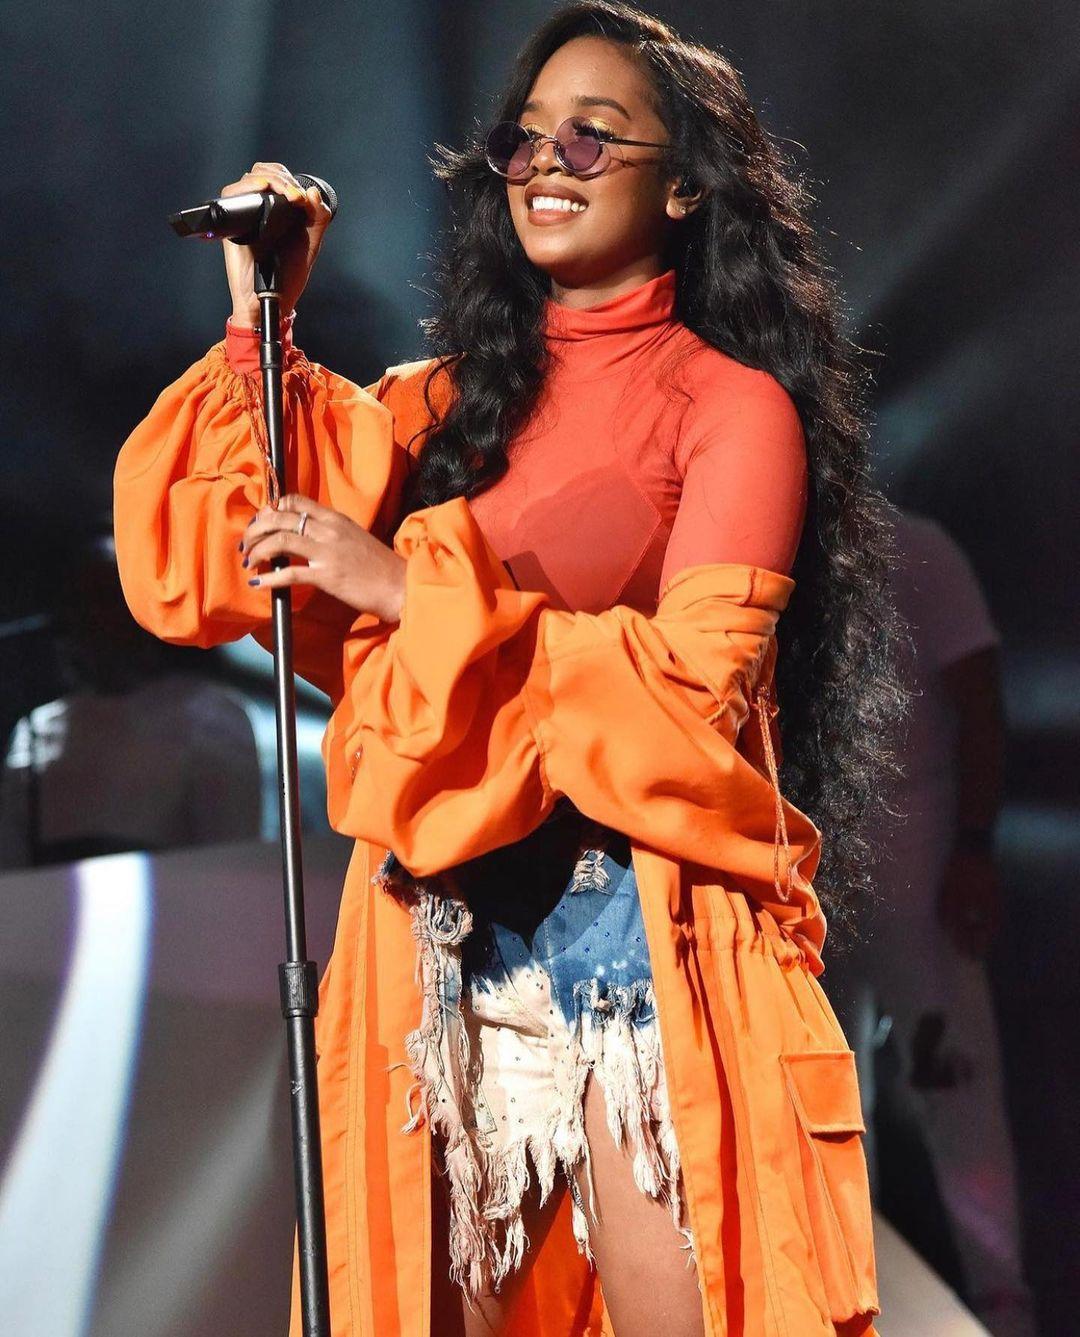 H.E.R. on stage